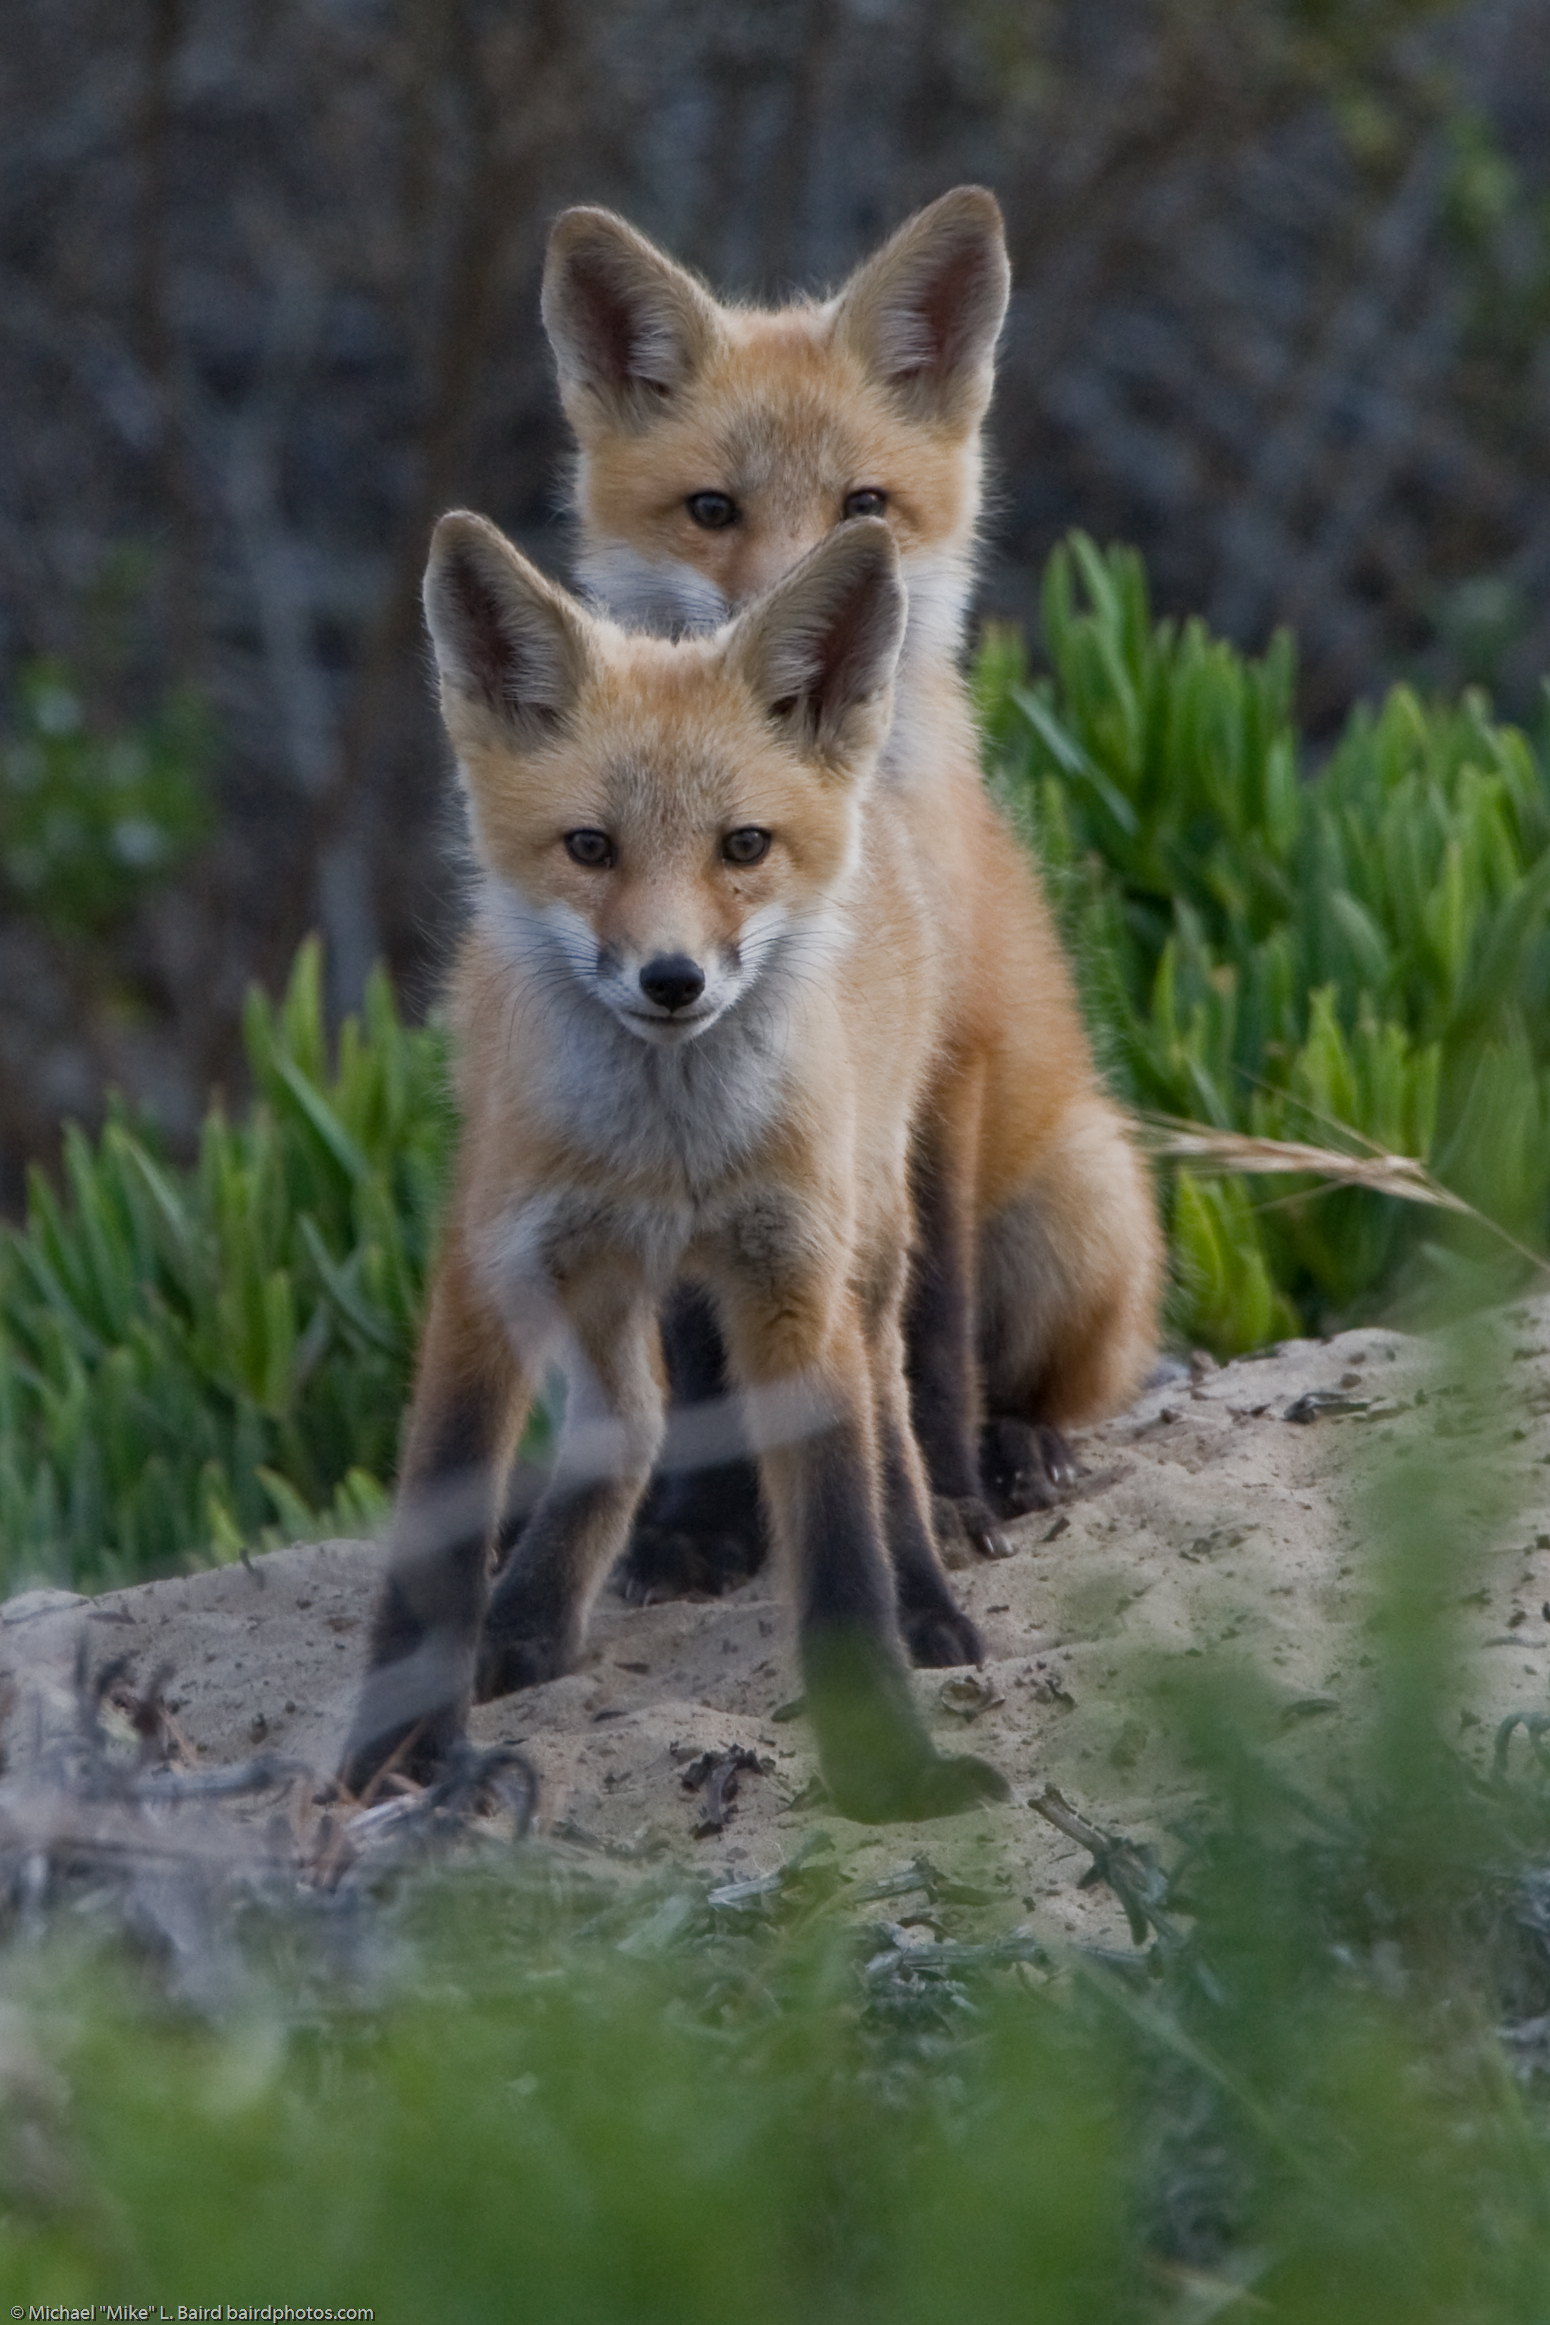 two baby foxes in the woods looking towards the camera